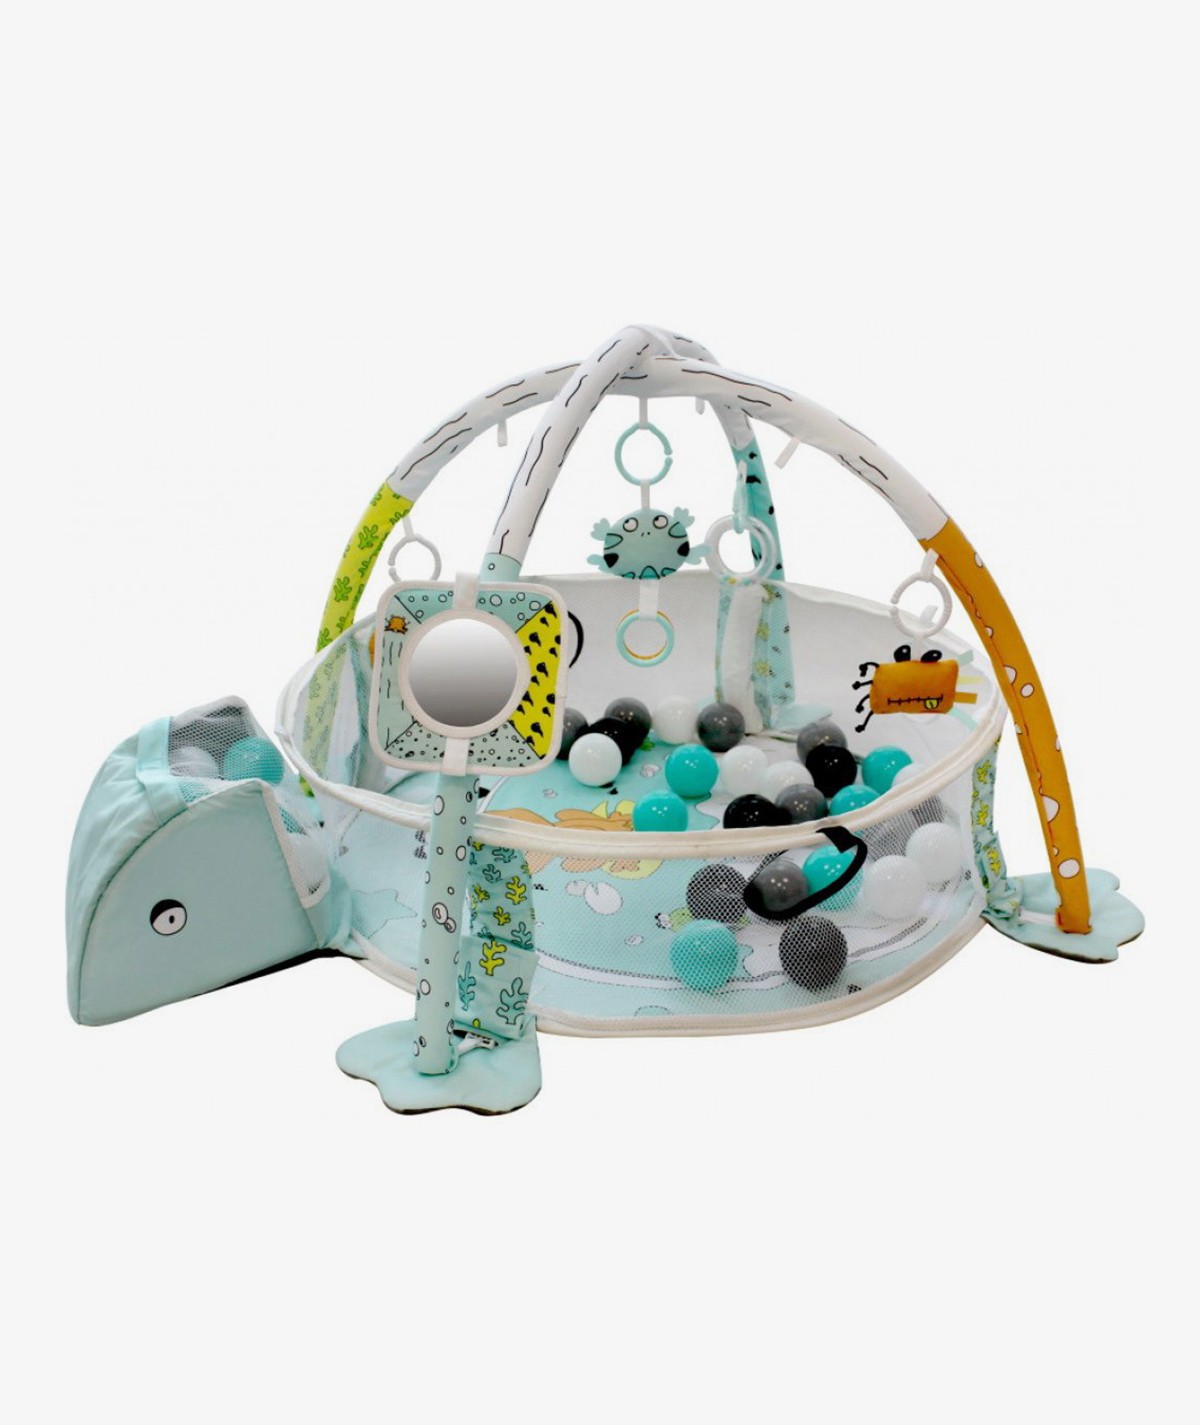 Ball Pit and Activity Gym